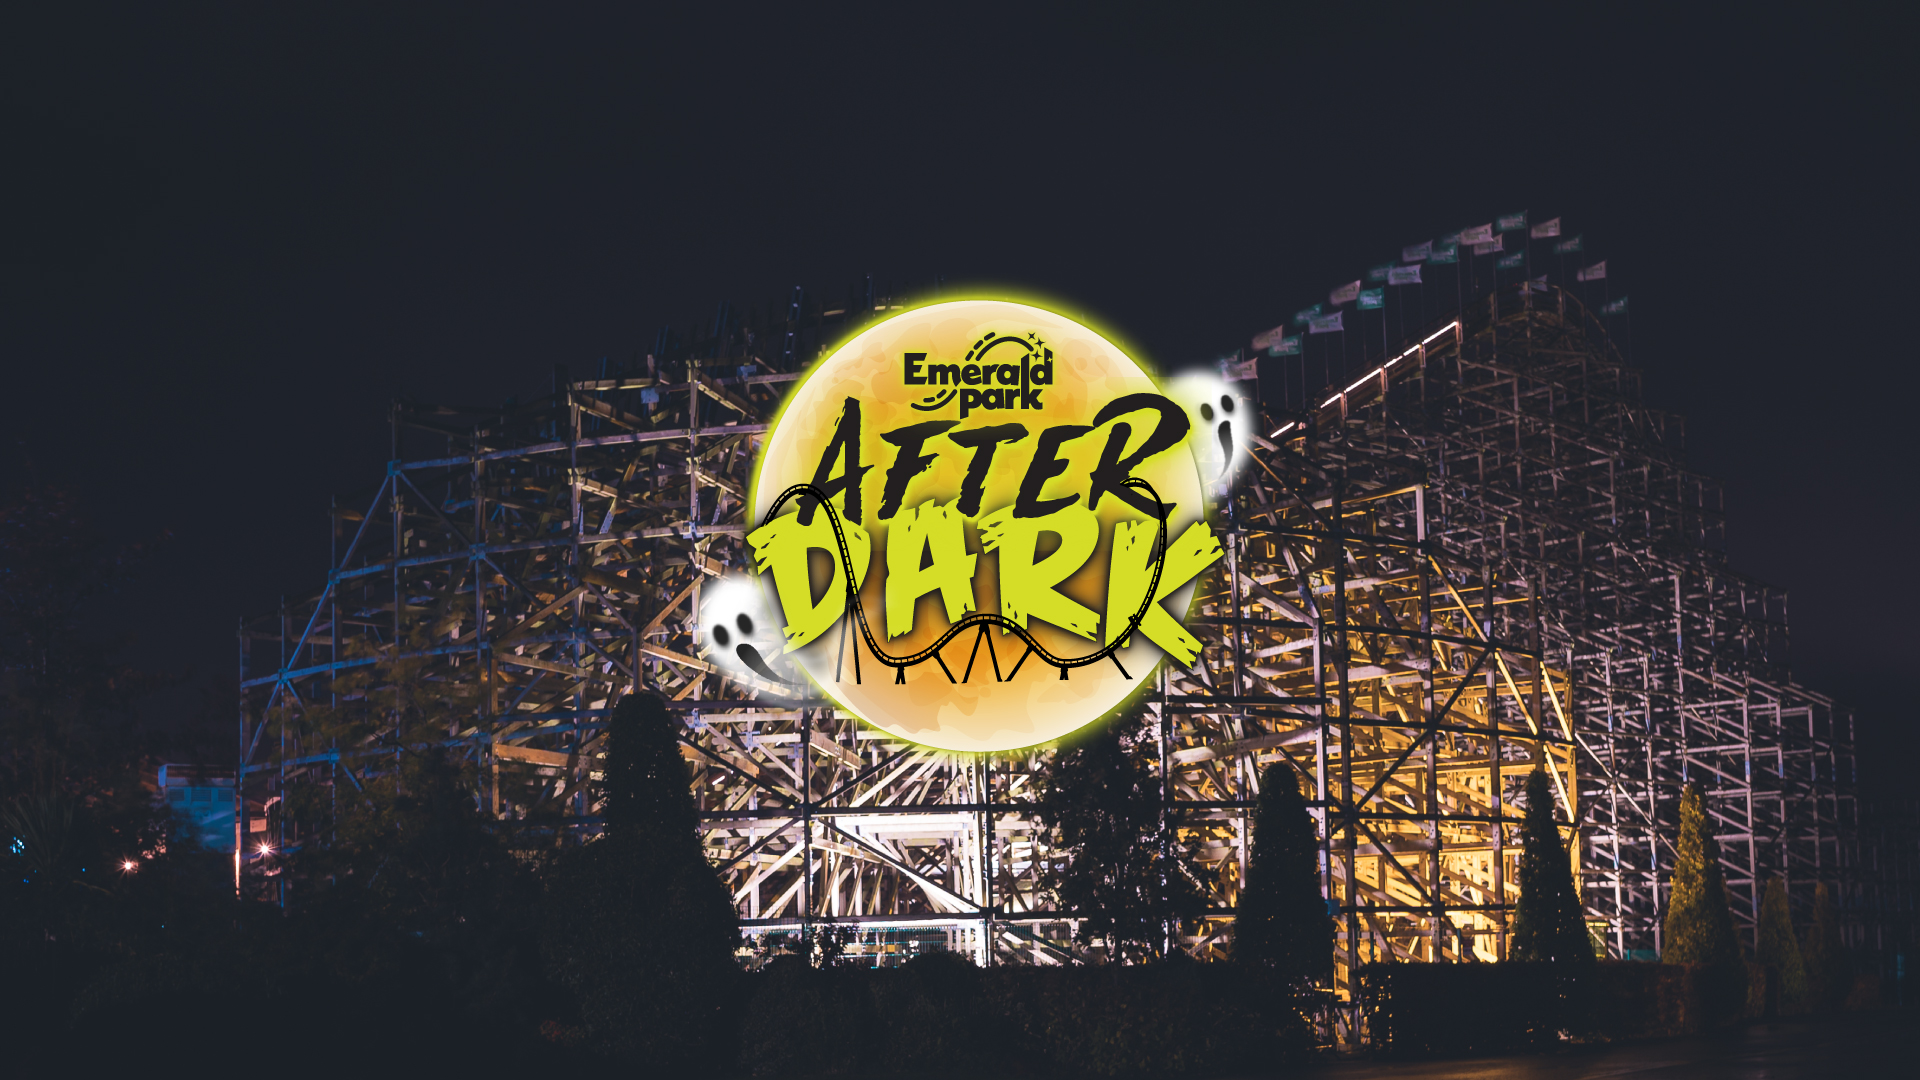 a shot of Cu Chulainn at Emerald Park in the dark. Underneath the attraction is lit up. An Emerald Park logo for a Halloween event called After Dark overlays the image